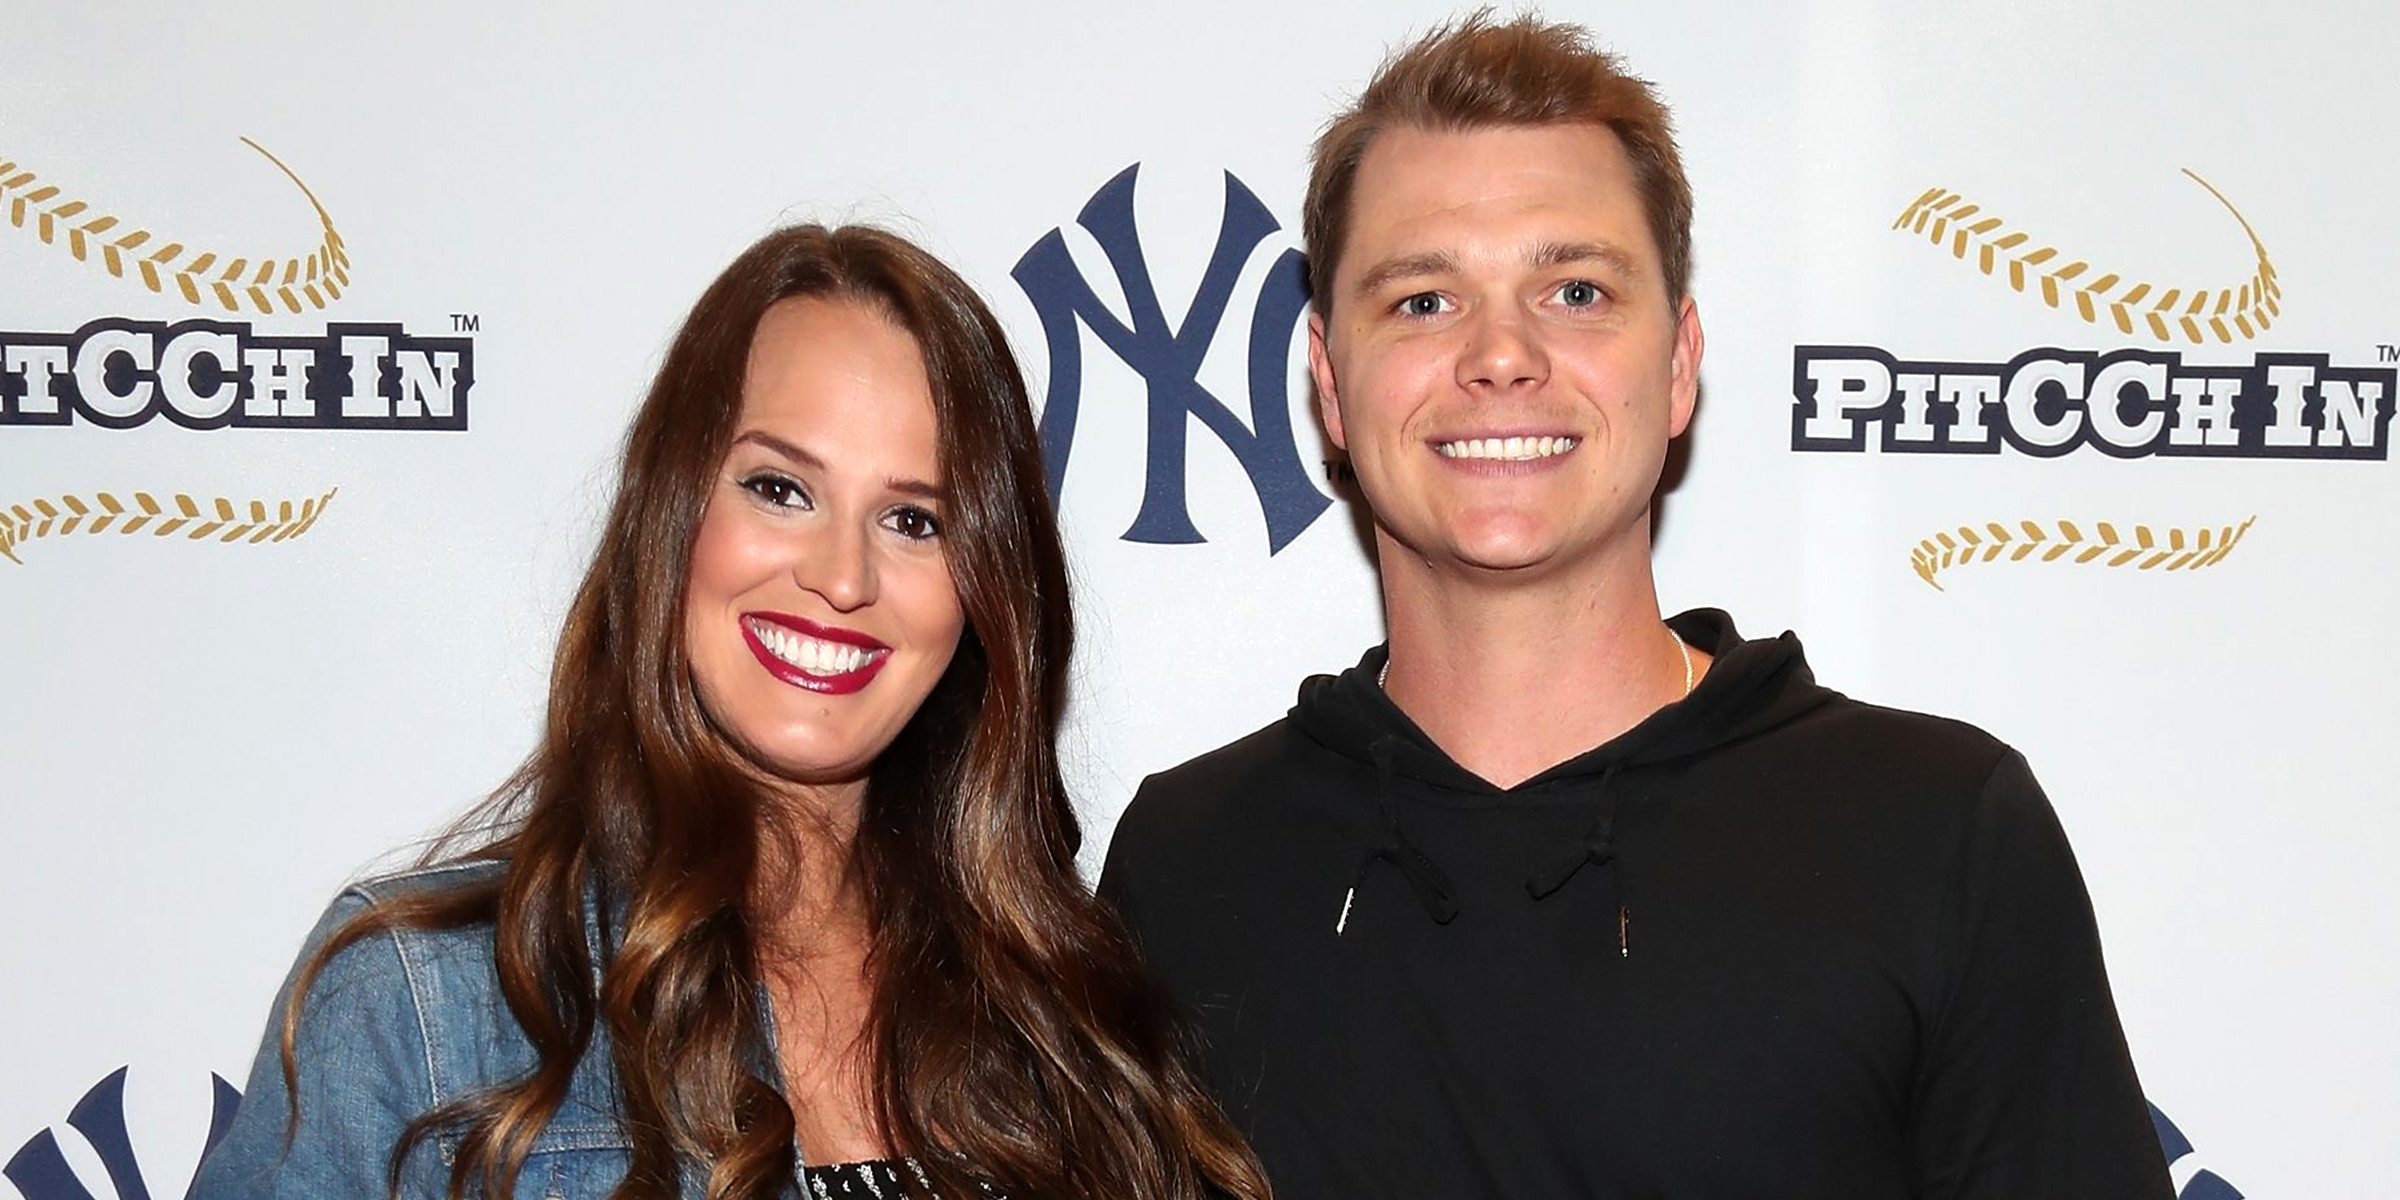 Jessica Forkum and Sonny Gray | Source: Getty Images